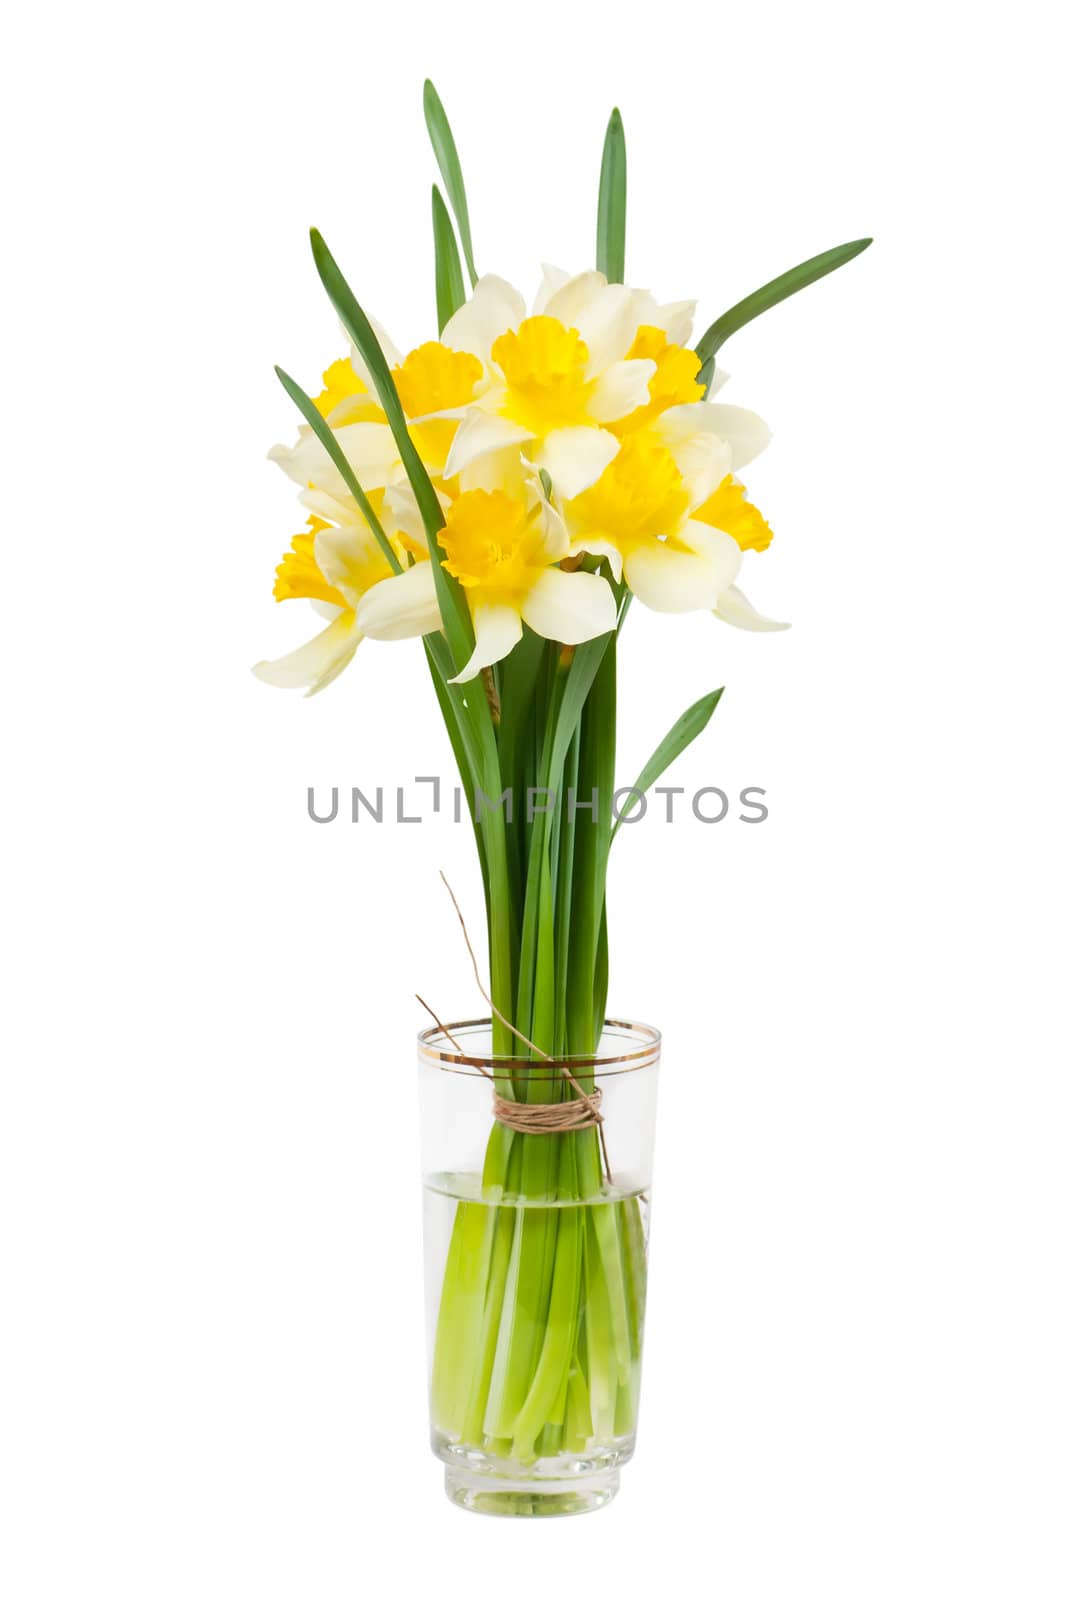 Narcissus by AGorohov